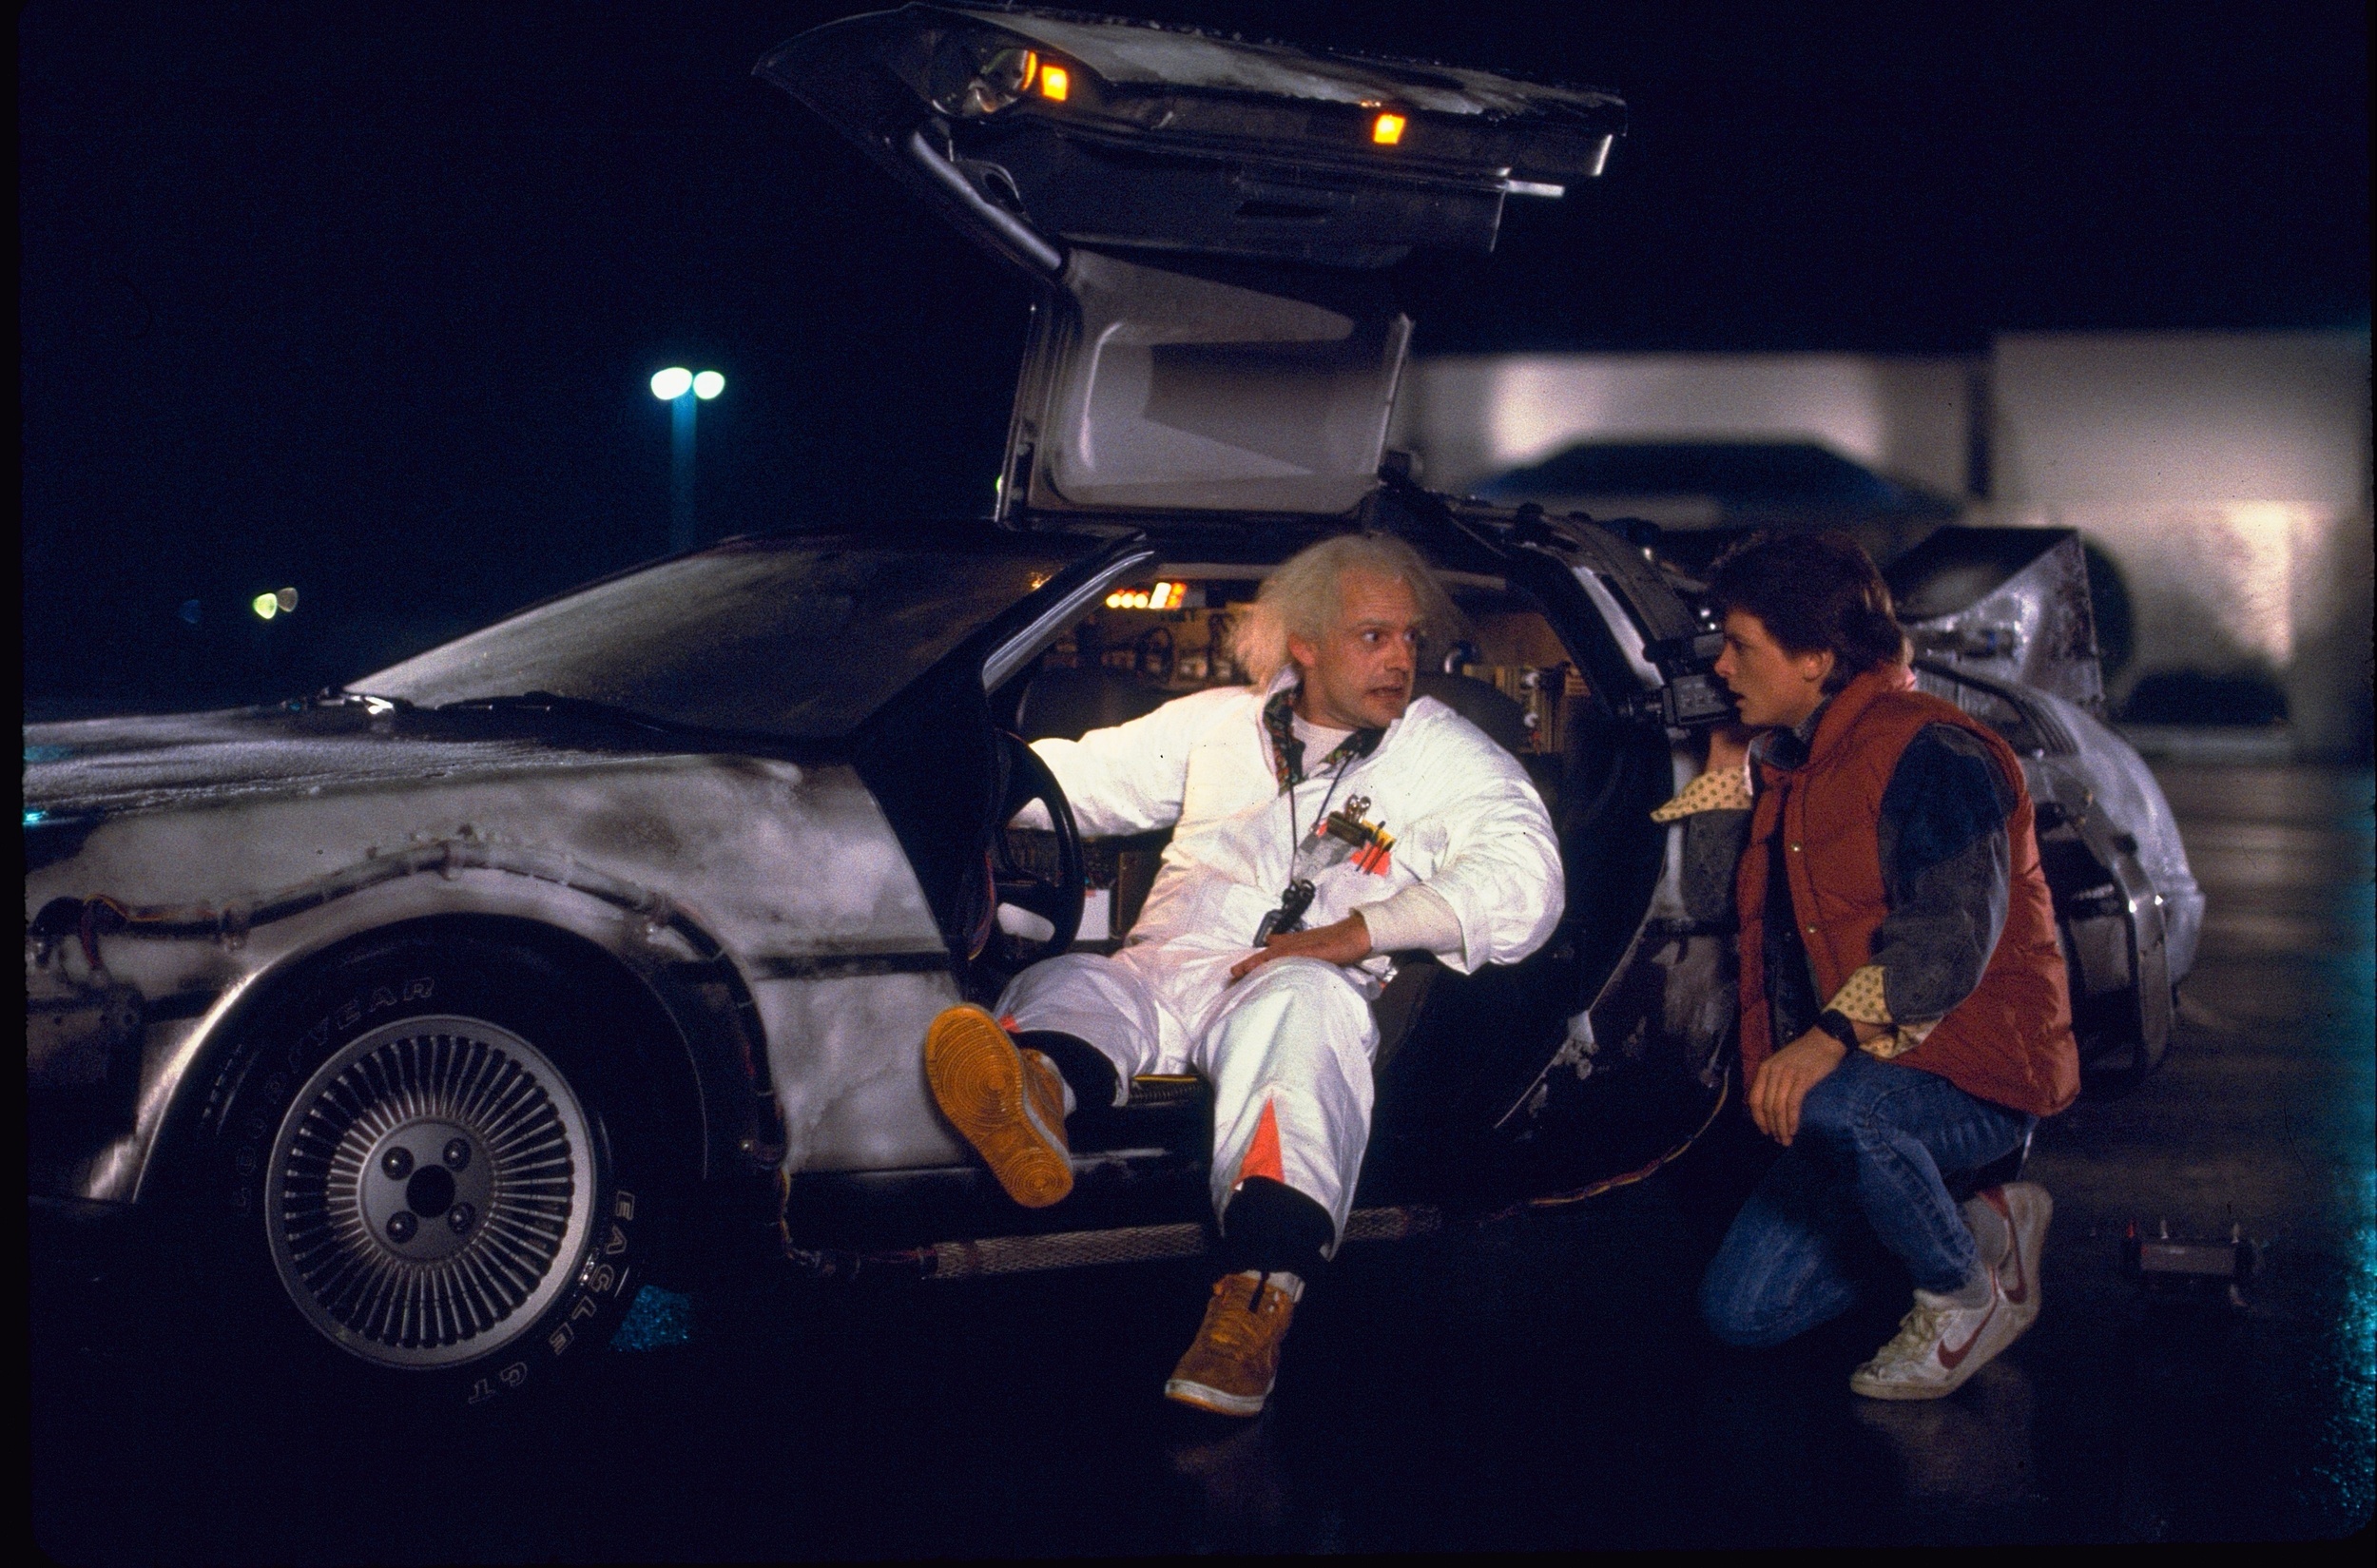 <p>The quintessential time travel movie. One of the biggest hits of all time. The progenitor of two very good sequels. (Yes, we like the third movie.) Marty McFly goes back in time in a DeLorean thanks to his friend Doc Brown and ends up intertwined in the life of his eventual parents back in 1955. Plus, all that Huey Lewis!</p><p>You may also like: <a href='https://www.yardbarker.com/entertainment/articles/the_most_memorable_movie_character_deaths_092323/s1__33524210'>The most memorable movie character deaths</a></p>